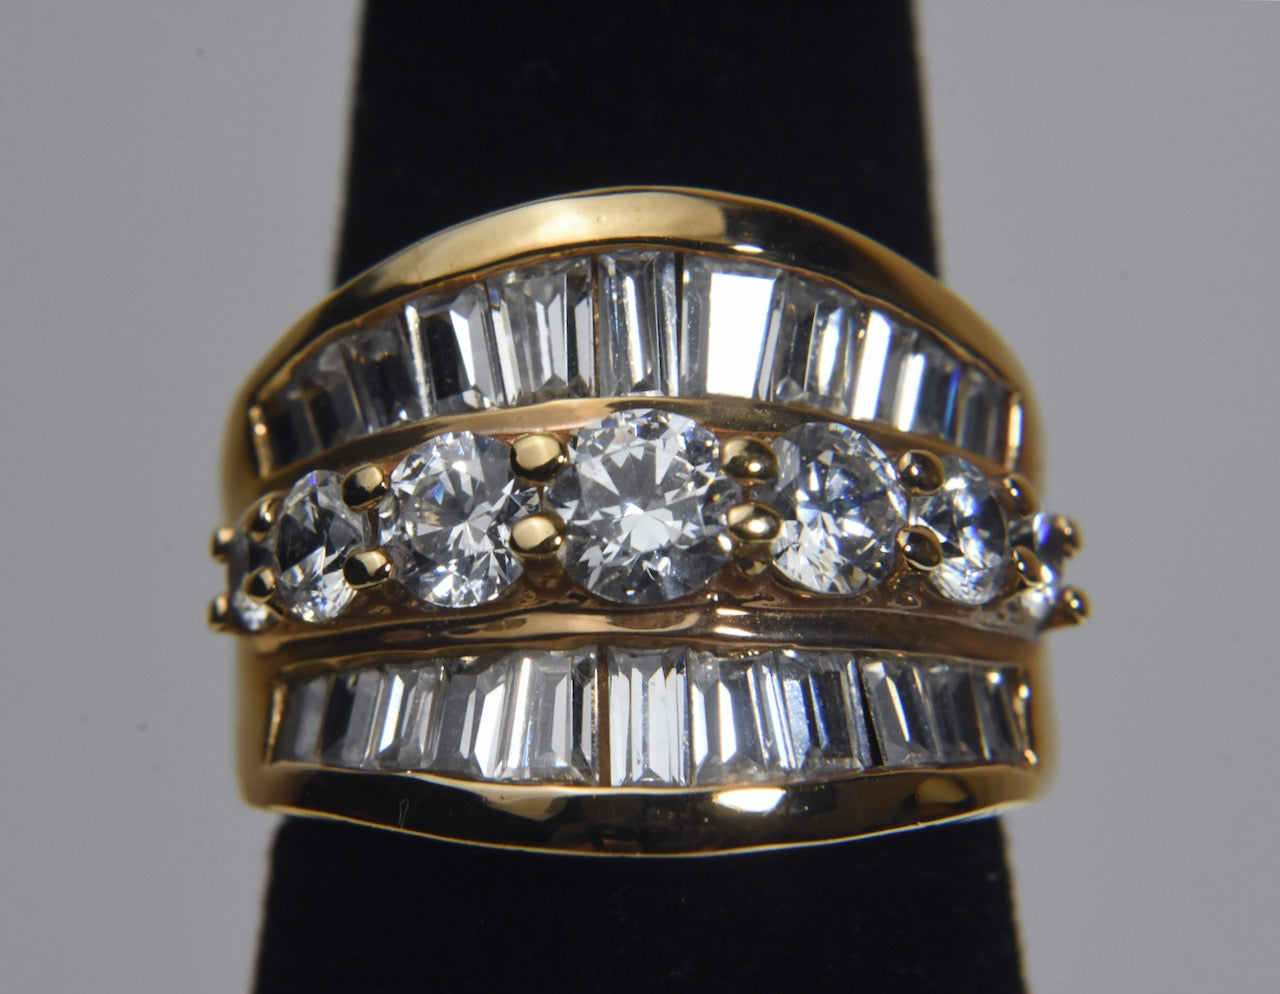 Ross-Simons - Sterling Silver Gold Tone Ring Studded with Cubic Zirconia - Size 6.25